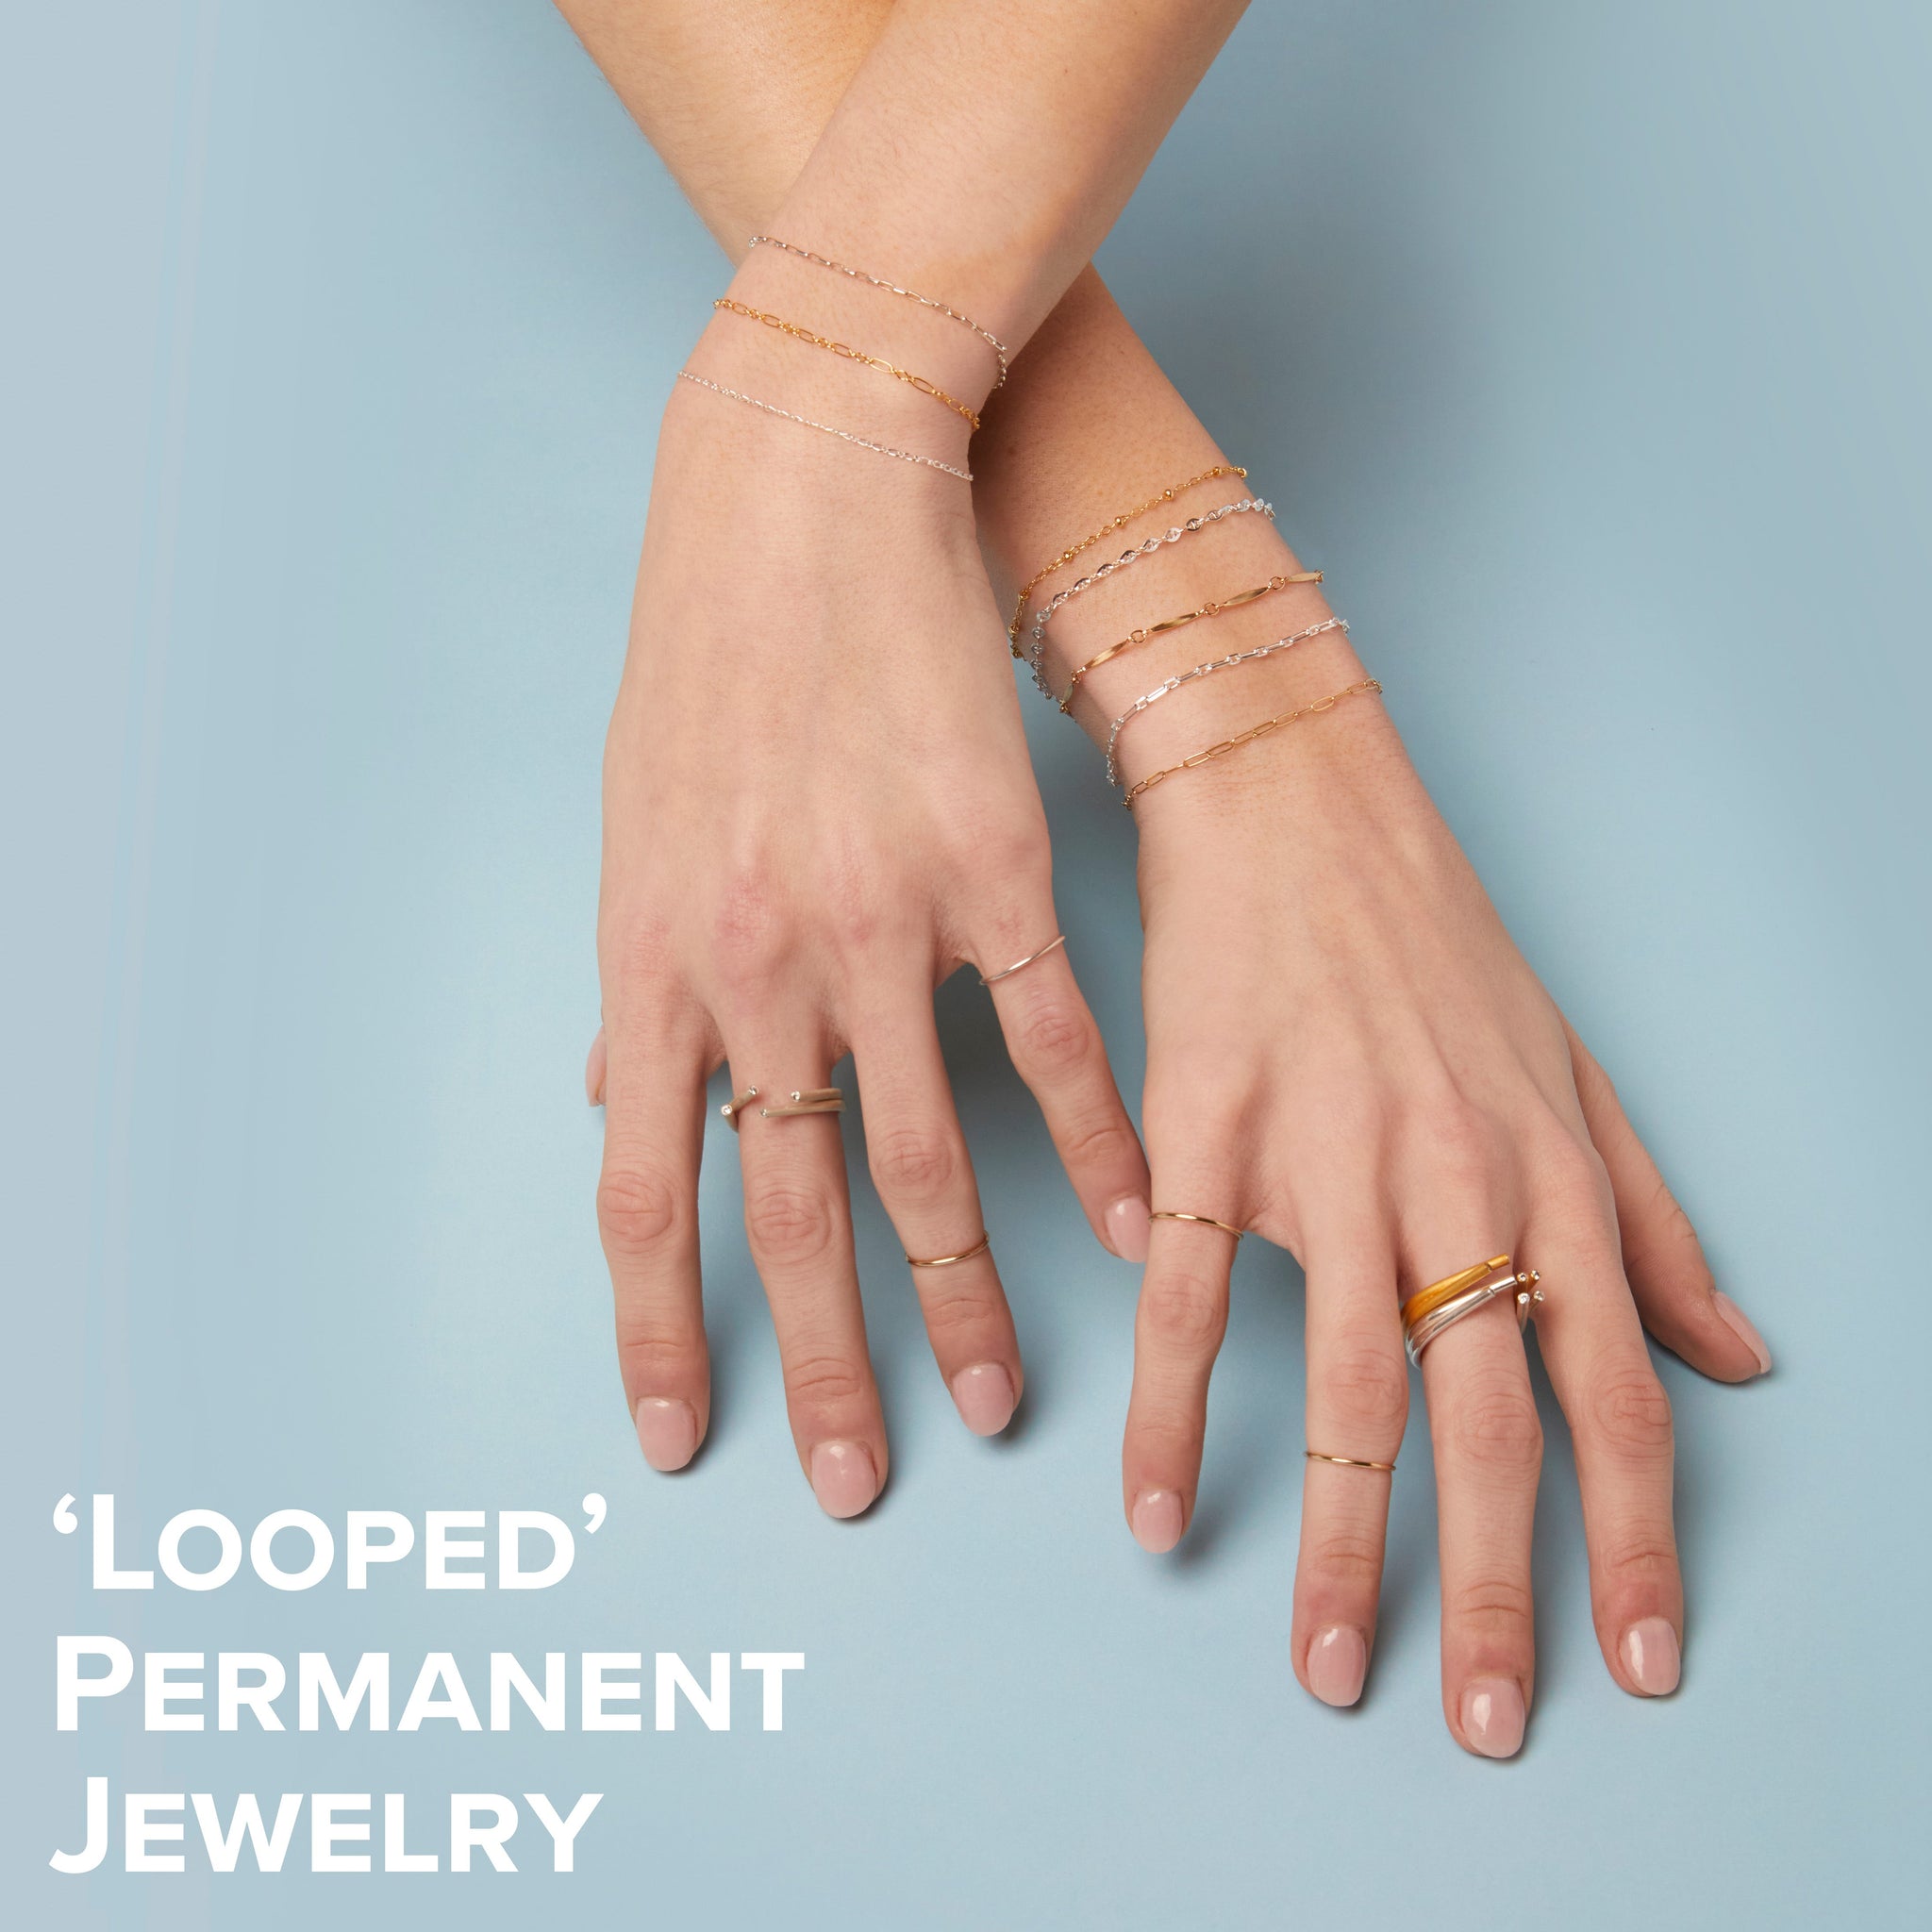 Looped - Permanent Jewelry at Pistachios! Bracelets Permanent Jewelry *5+ Guests - Please Contact Us*